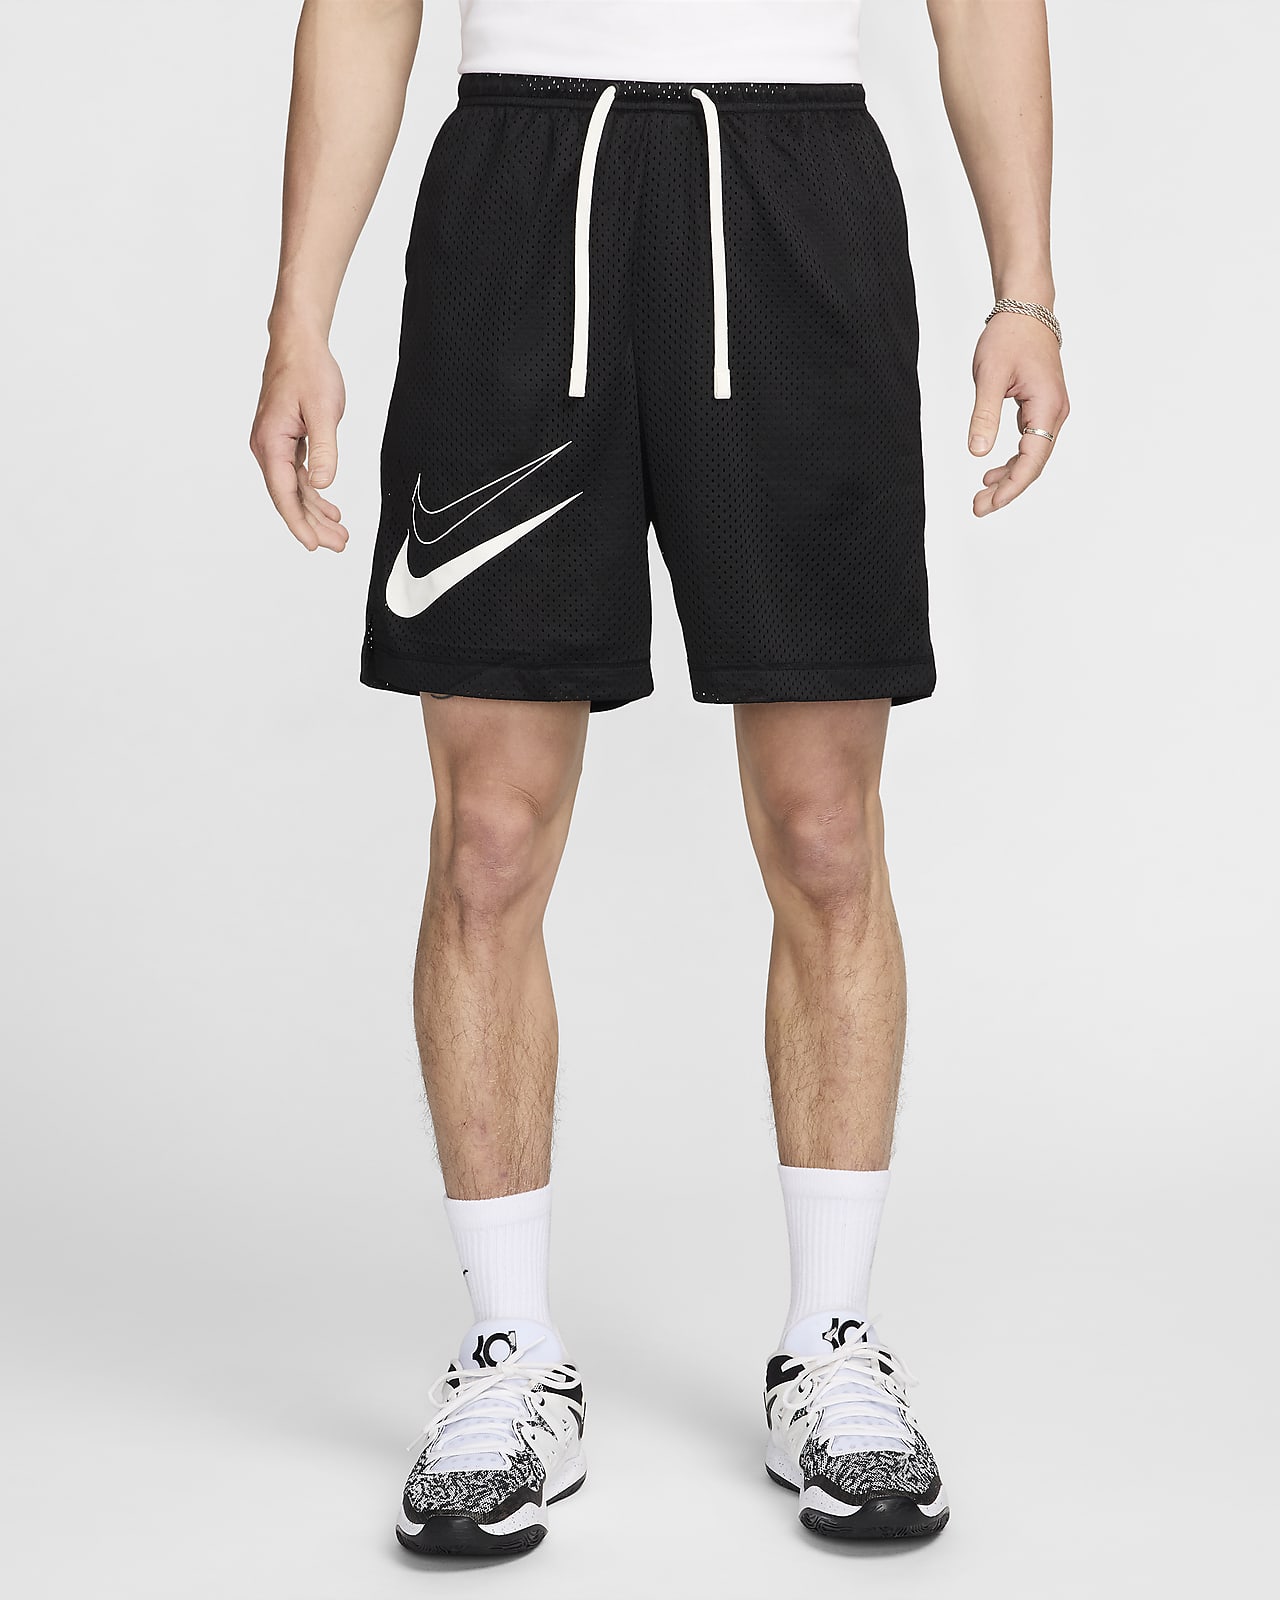 Kevin Durant Men's Dri-FIT Standard Issue Reversible Basketball Shorts